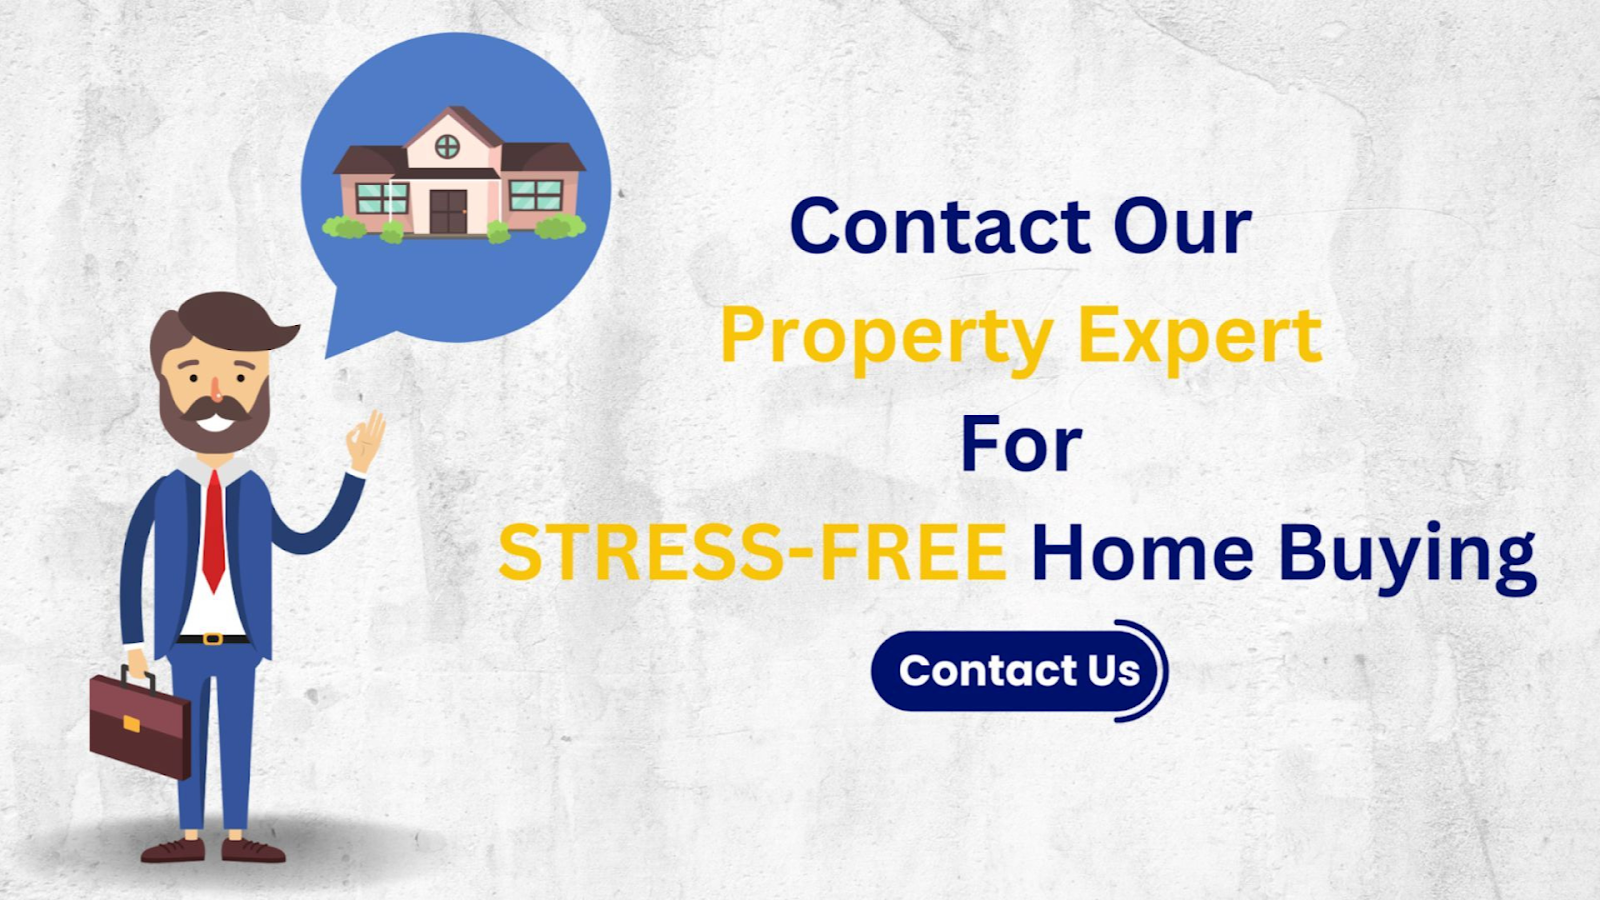 Contact PropertyCloud experts for stress-free home buying.